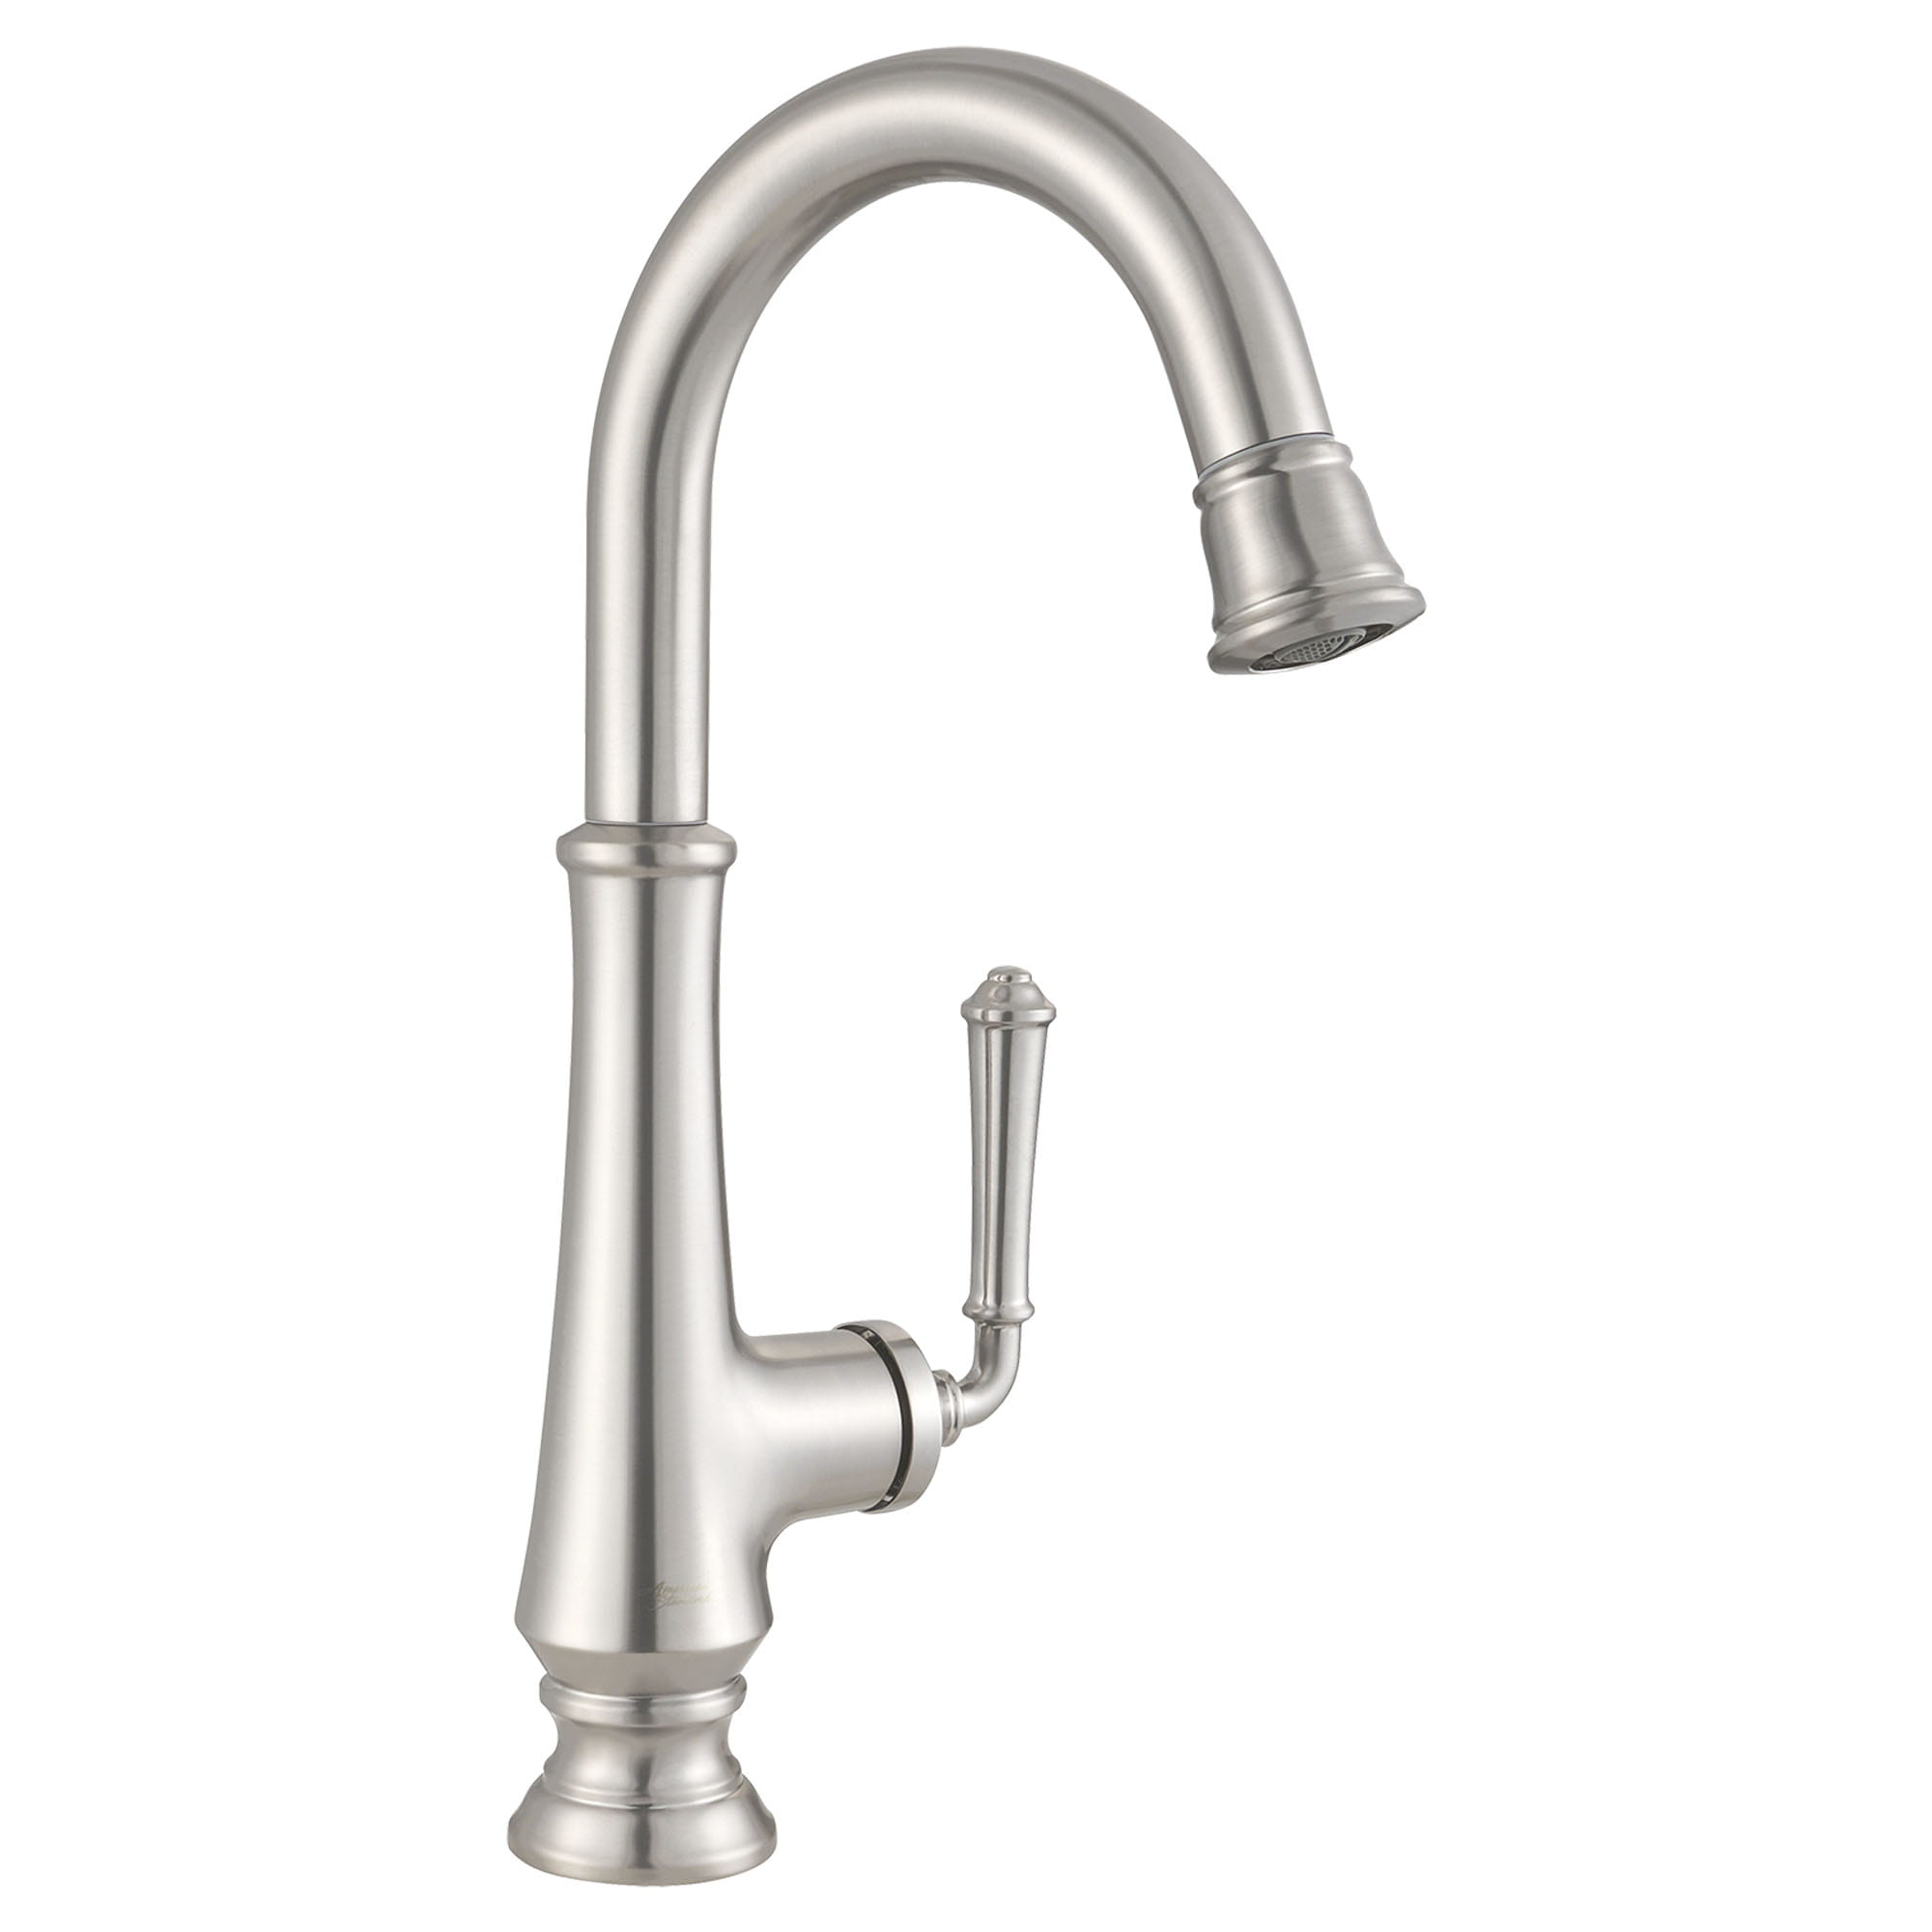 Delancey® Single-Handle Pull-Down Bar Faucet 1.5 gpm/5.7 L/min